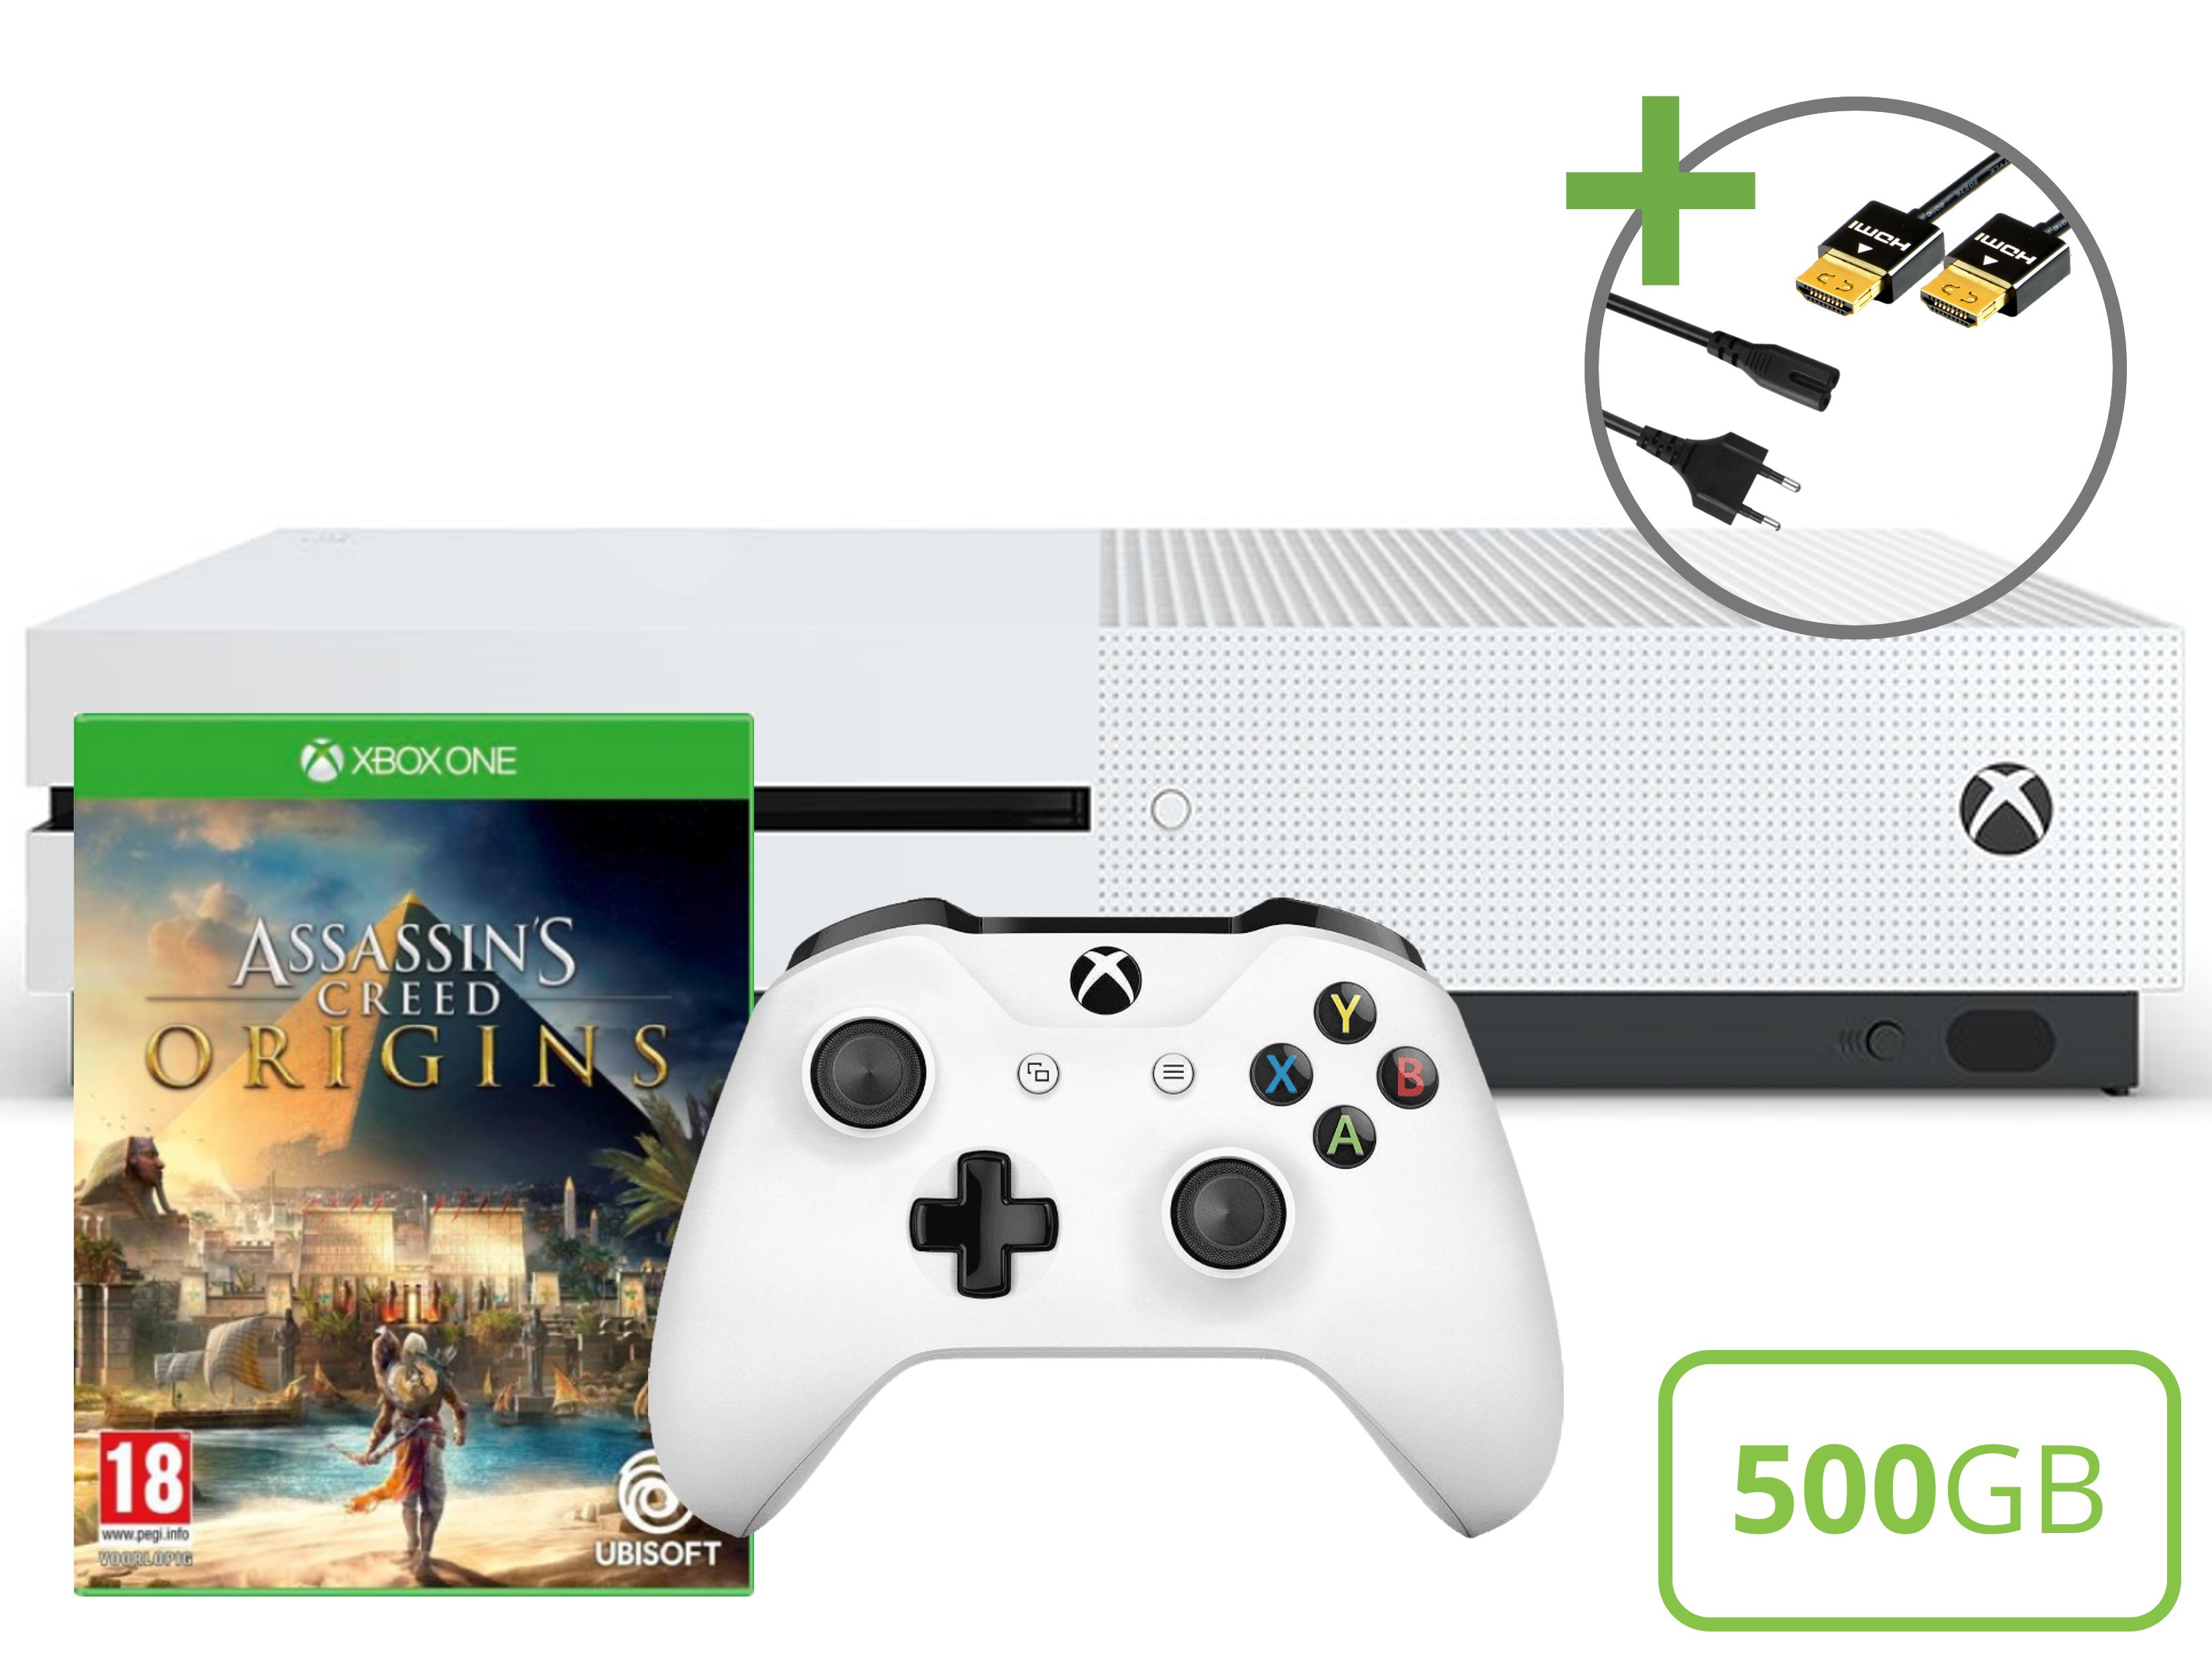 Microsoft Xbox One S Starter Pack - 500GB Assassin's Creed Origins Edition - Xbox One Hardware